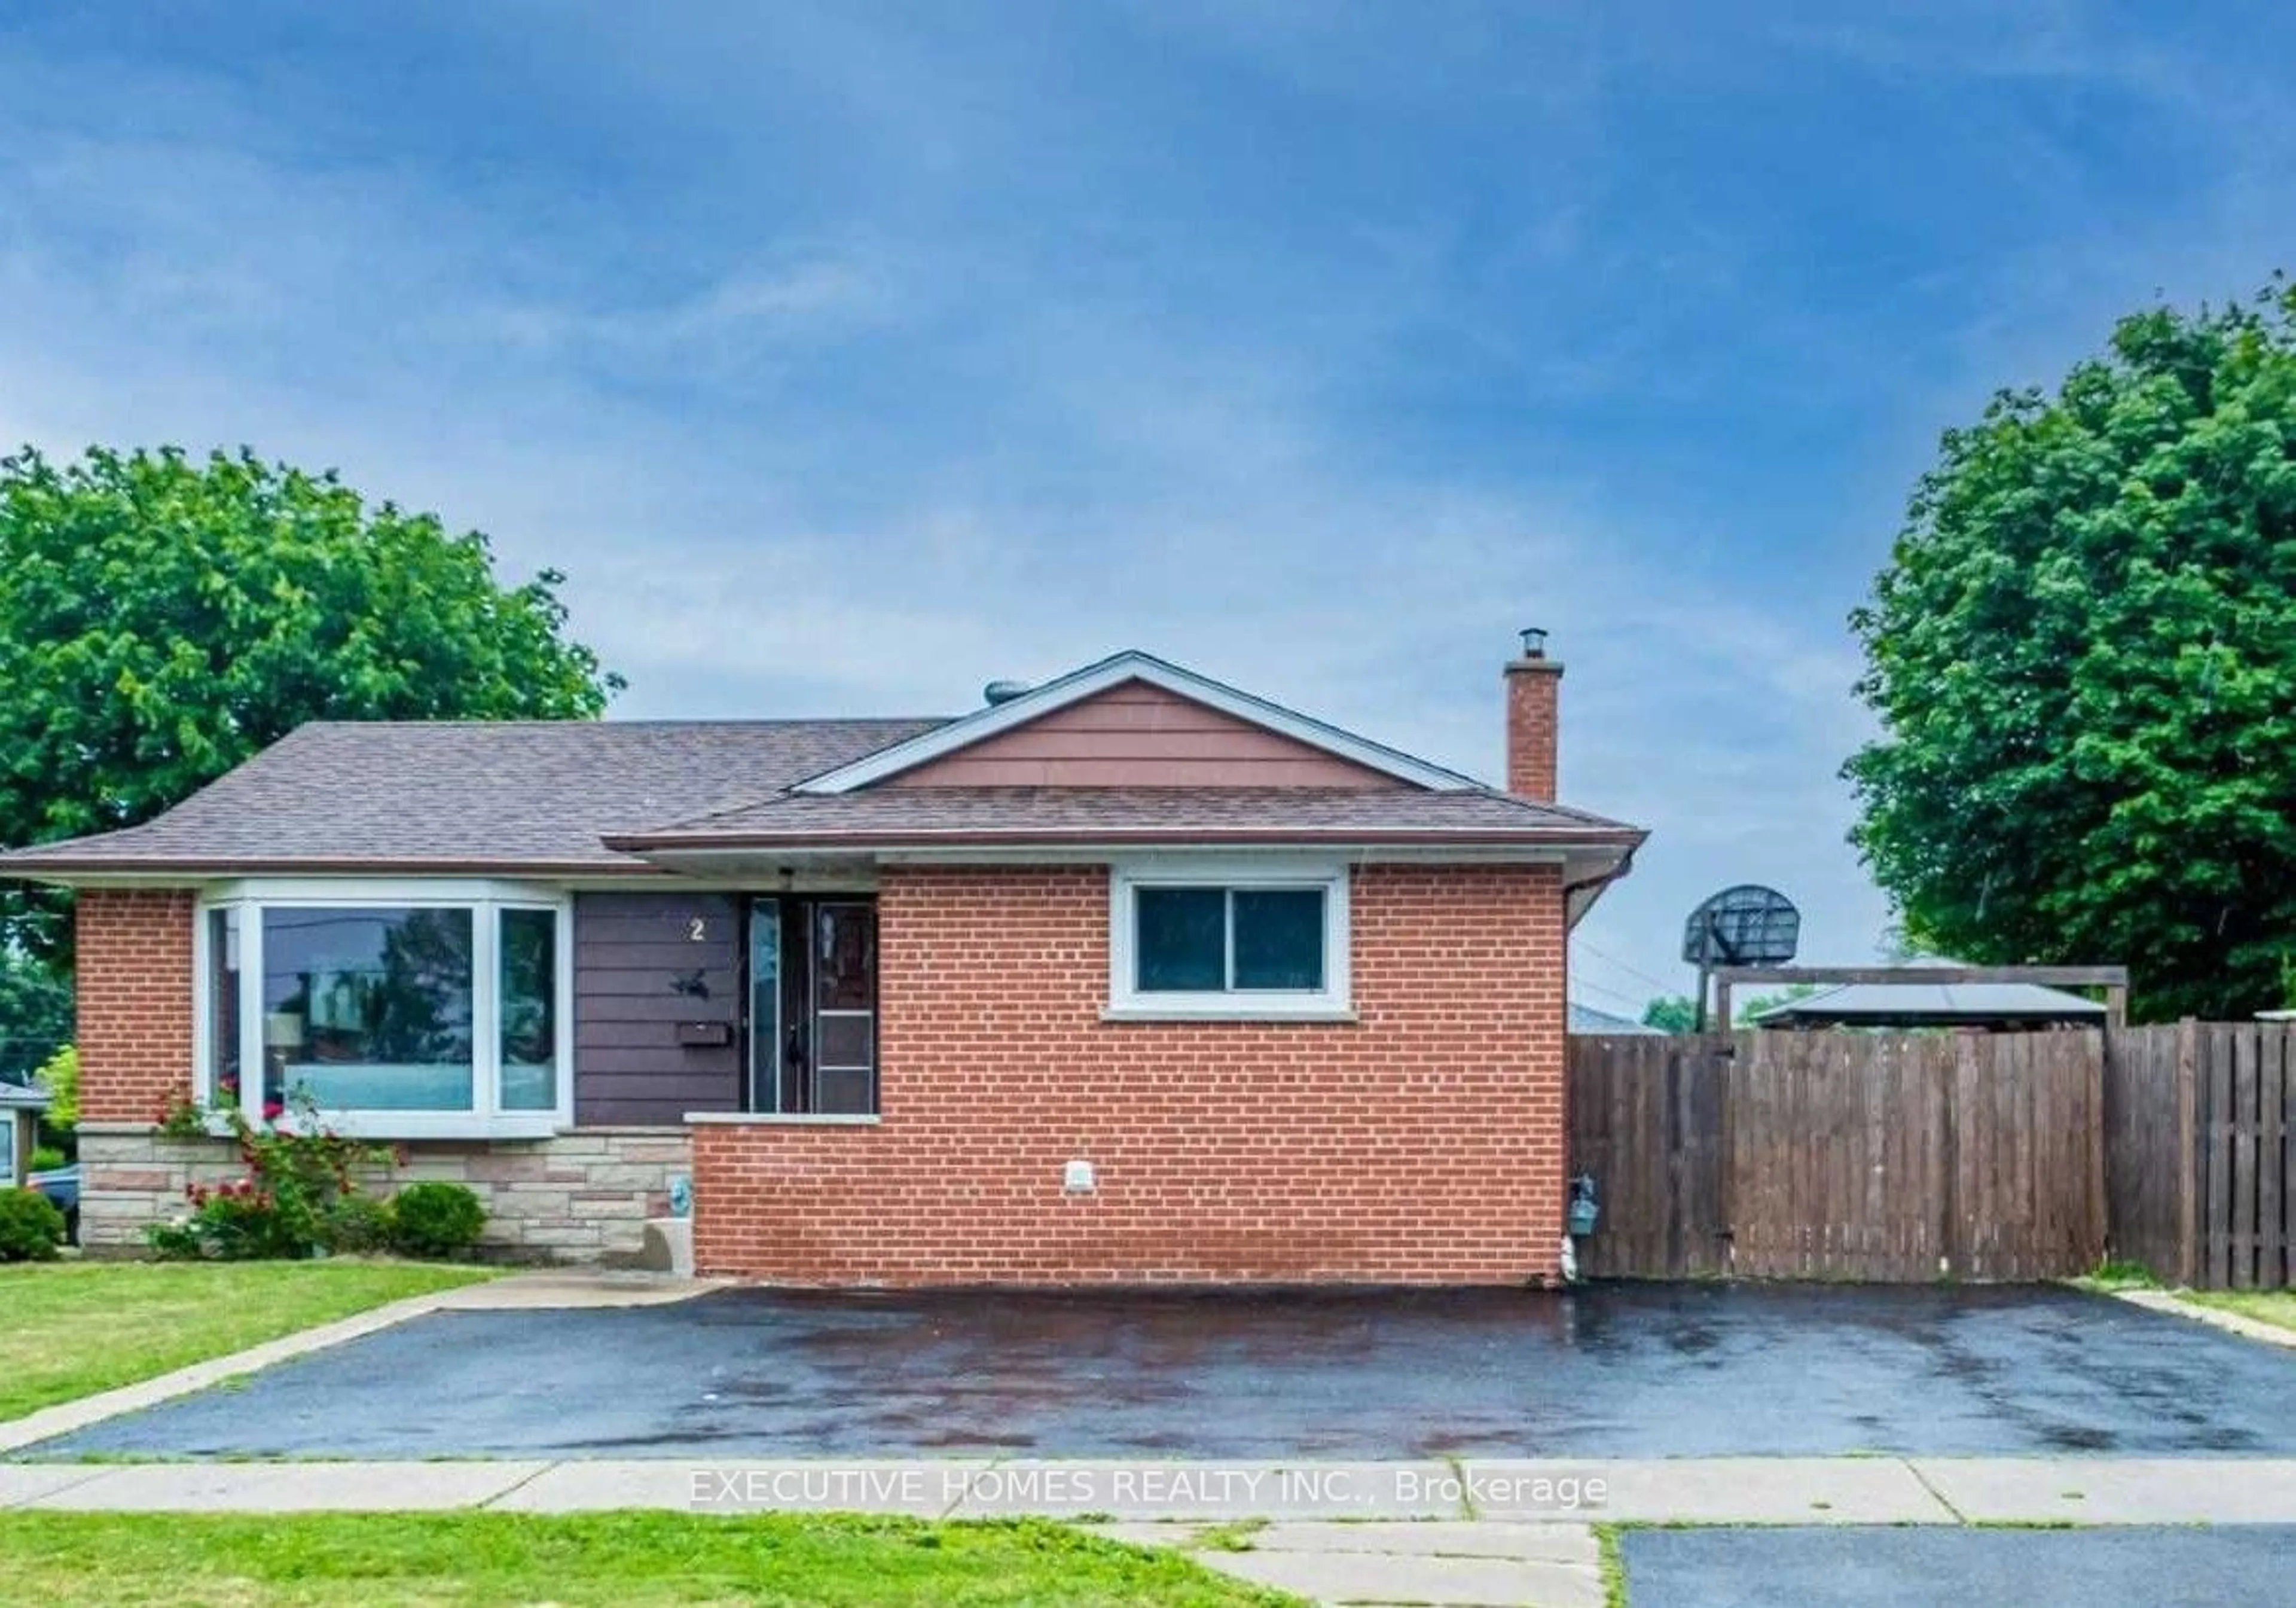 Home with brick exterior material for 2 Milner Rd, Brampton Ontario L6W 3A5